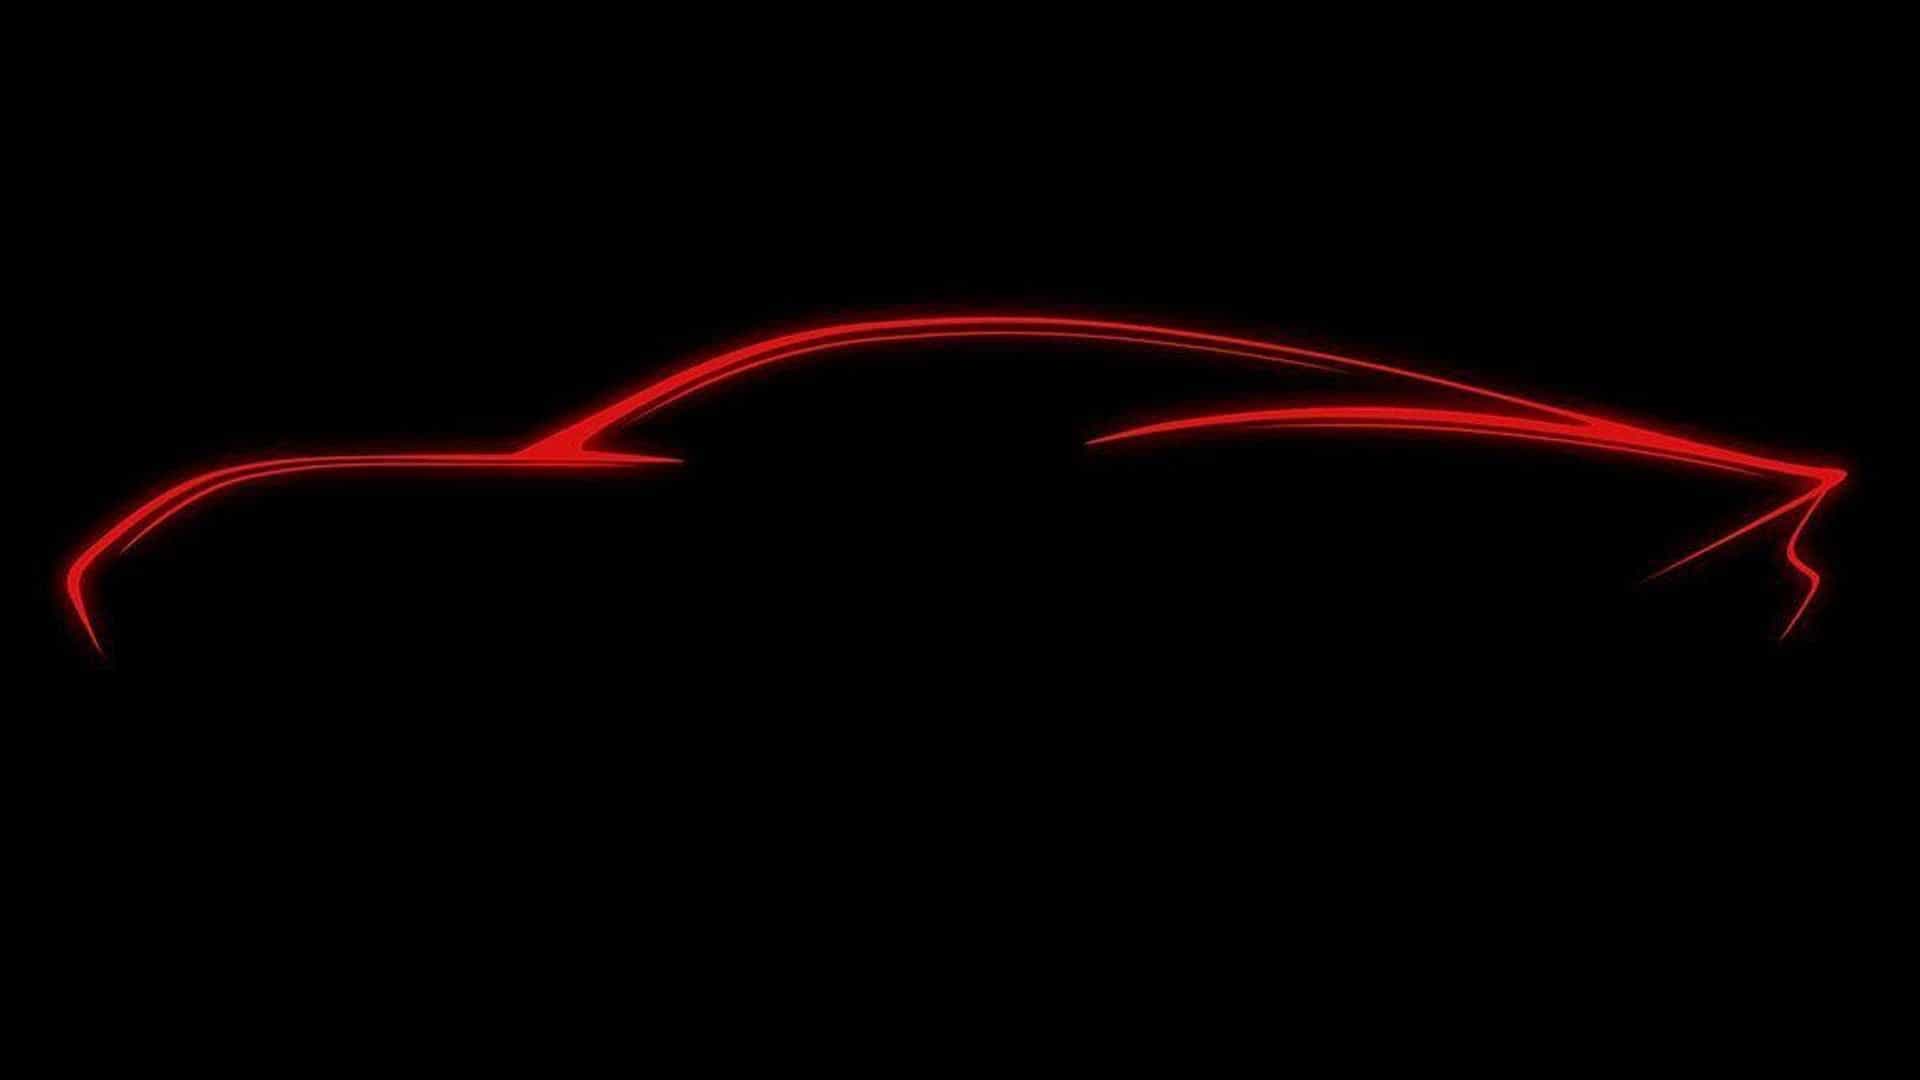 Teaser for Mercedes-Benz Vision AMG concept debuting on May 19, 2022